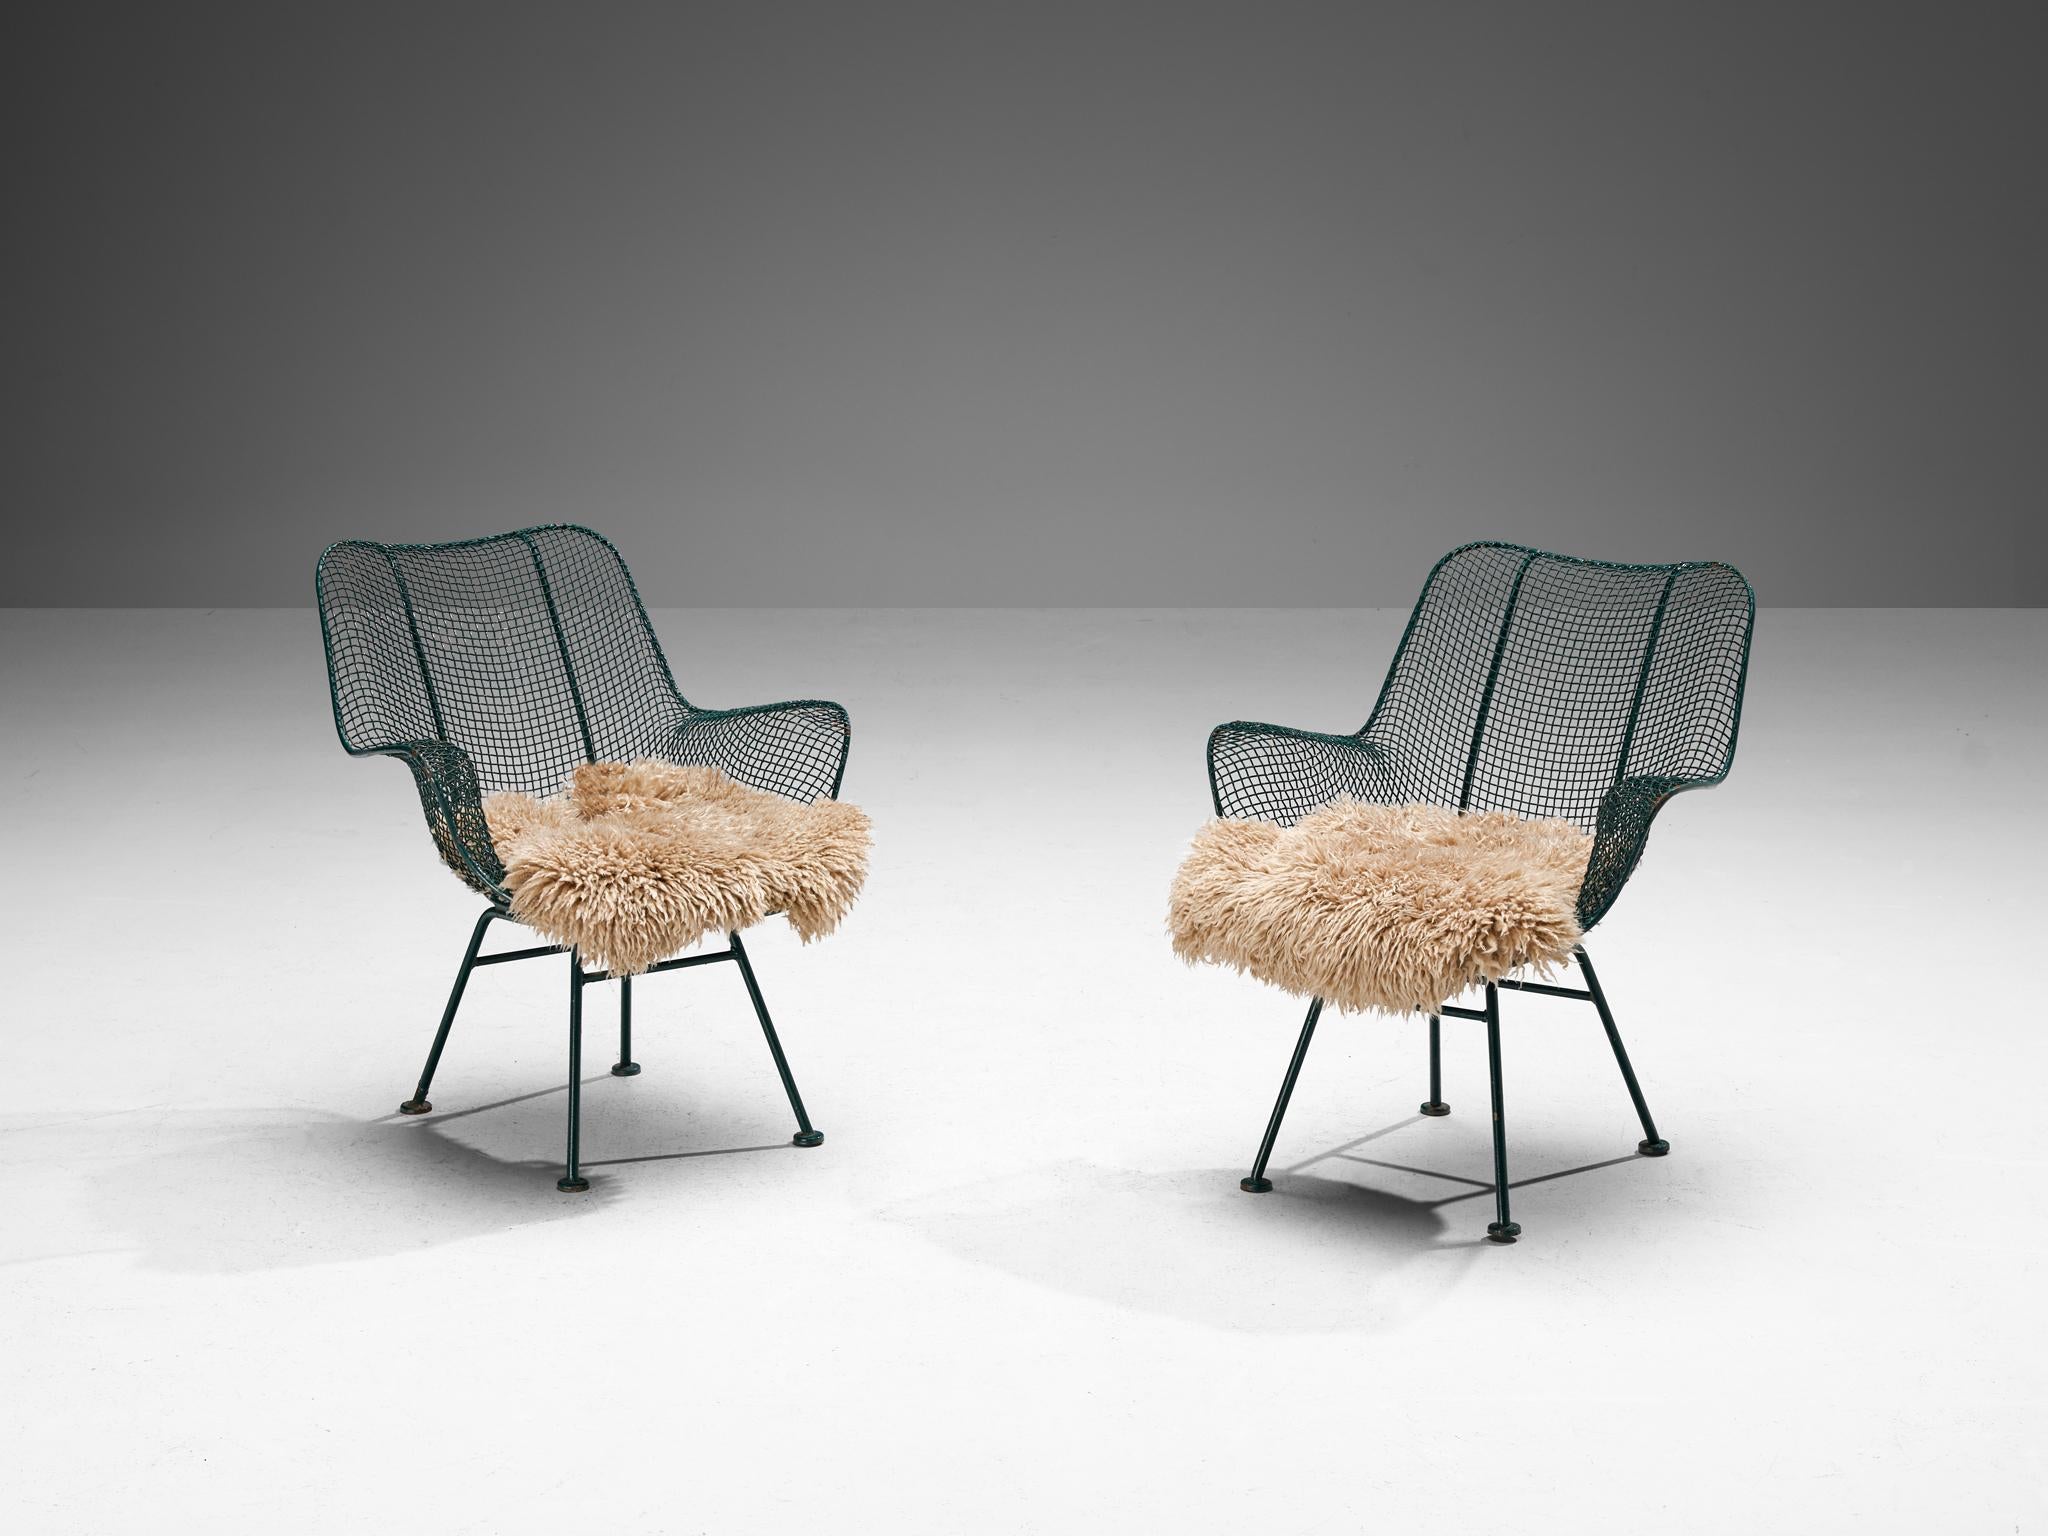 Russell Woodard 'Sculptura' Patio Chairs in Dark Green Lacquered Metal